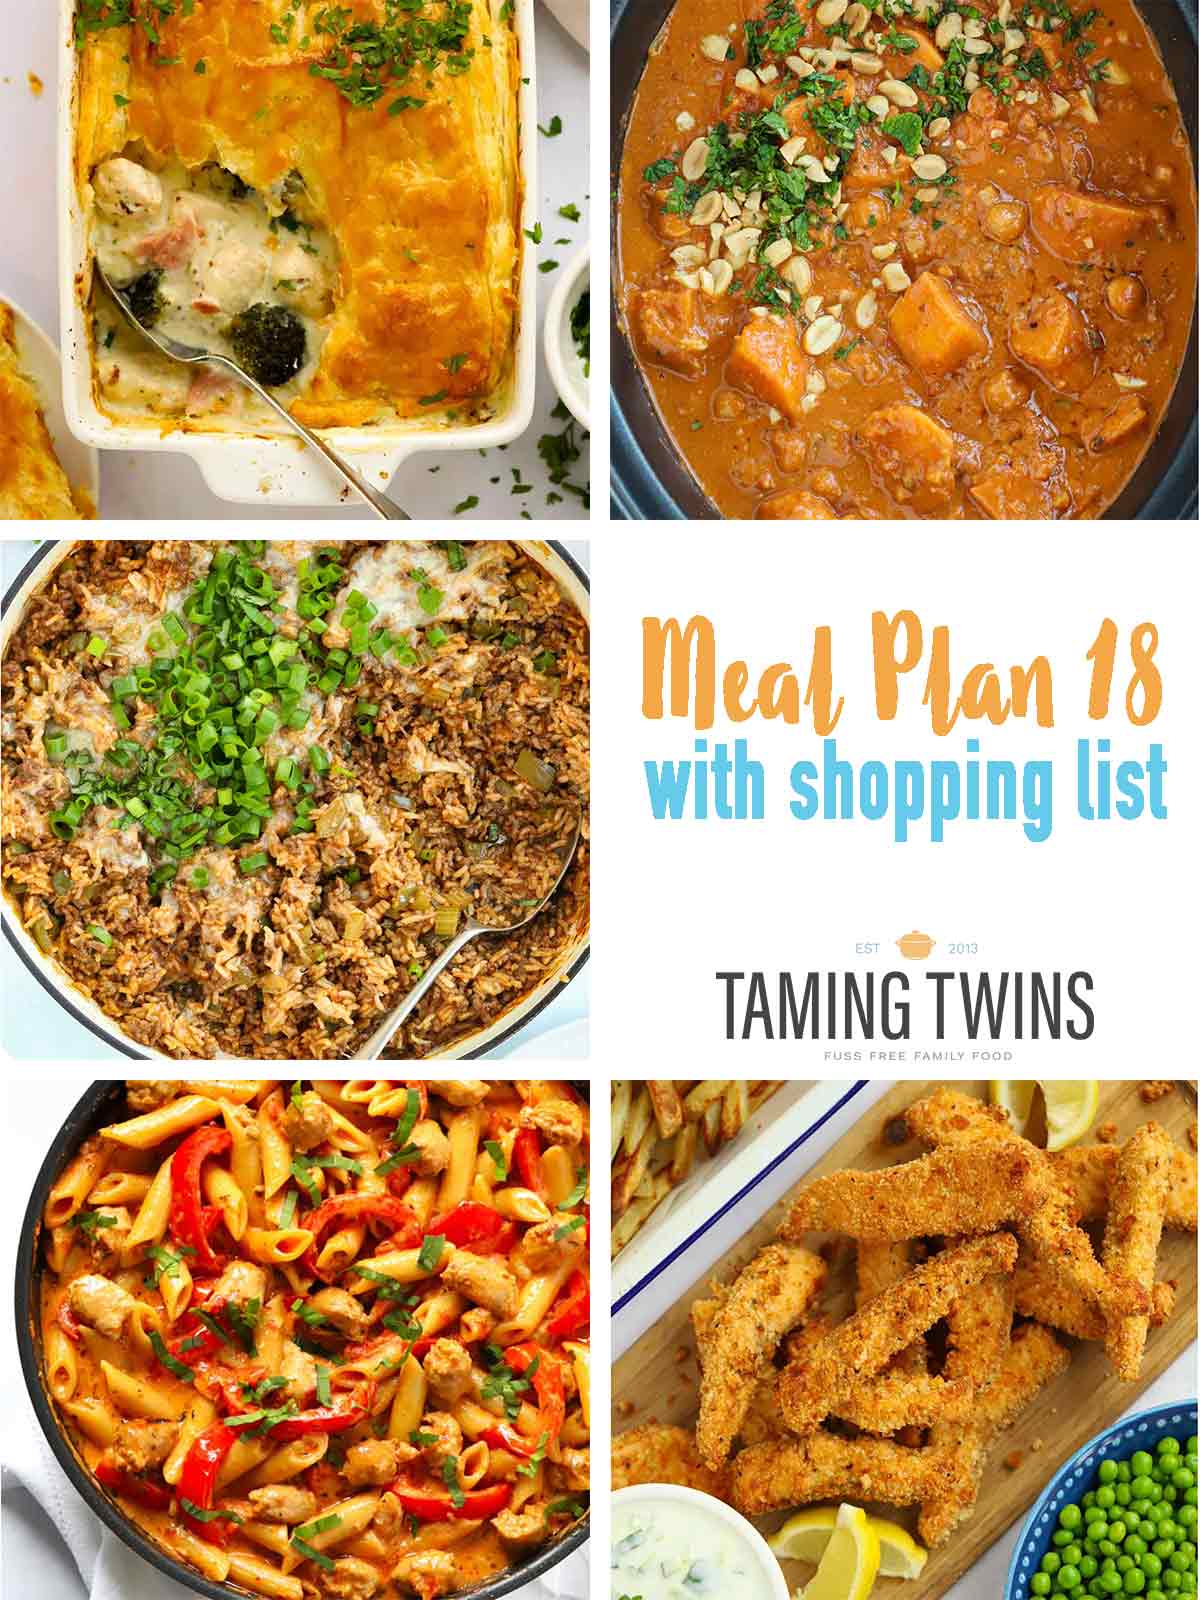 Recipes in Meal Plan 18 - 5 easy dinner recipes.